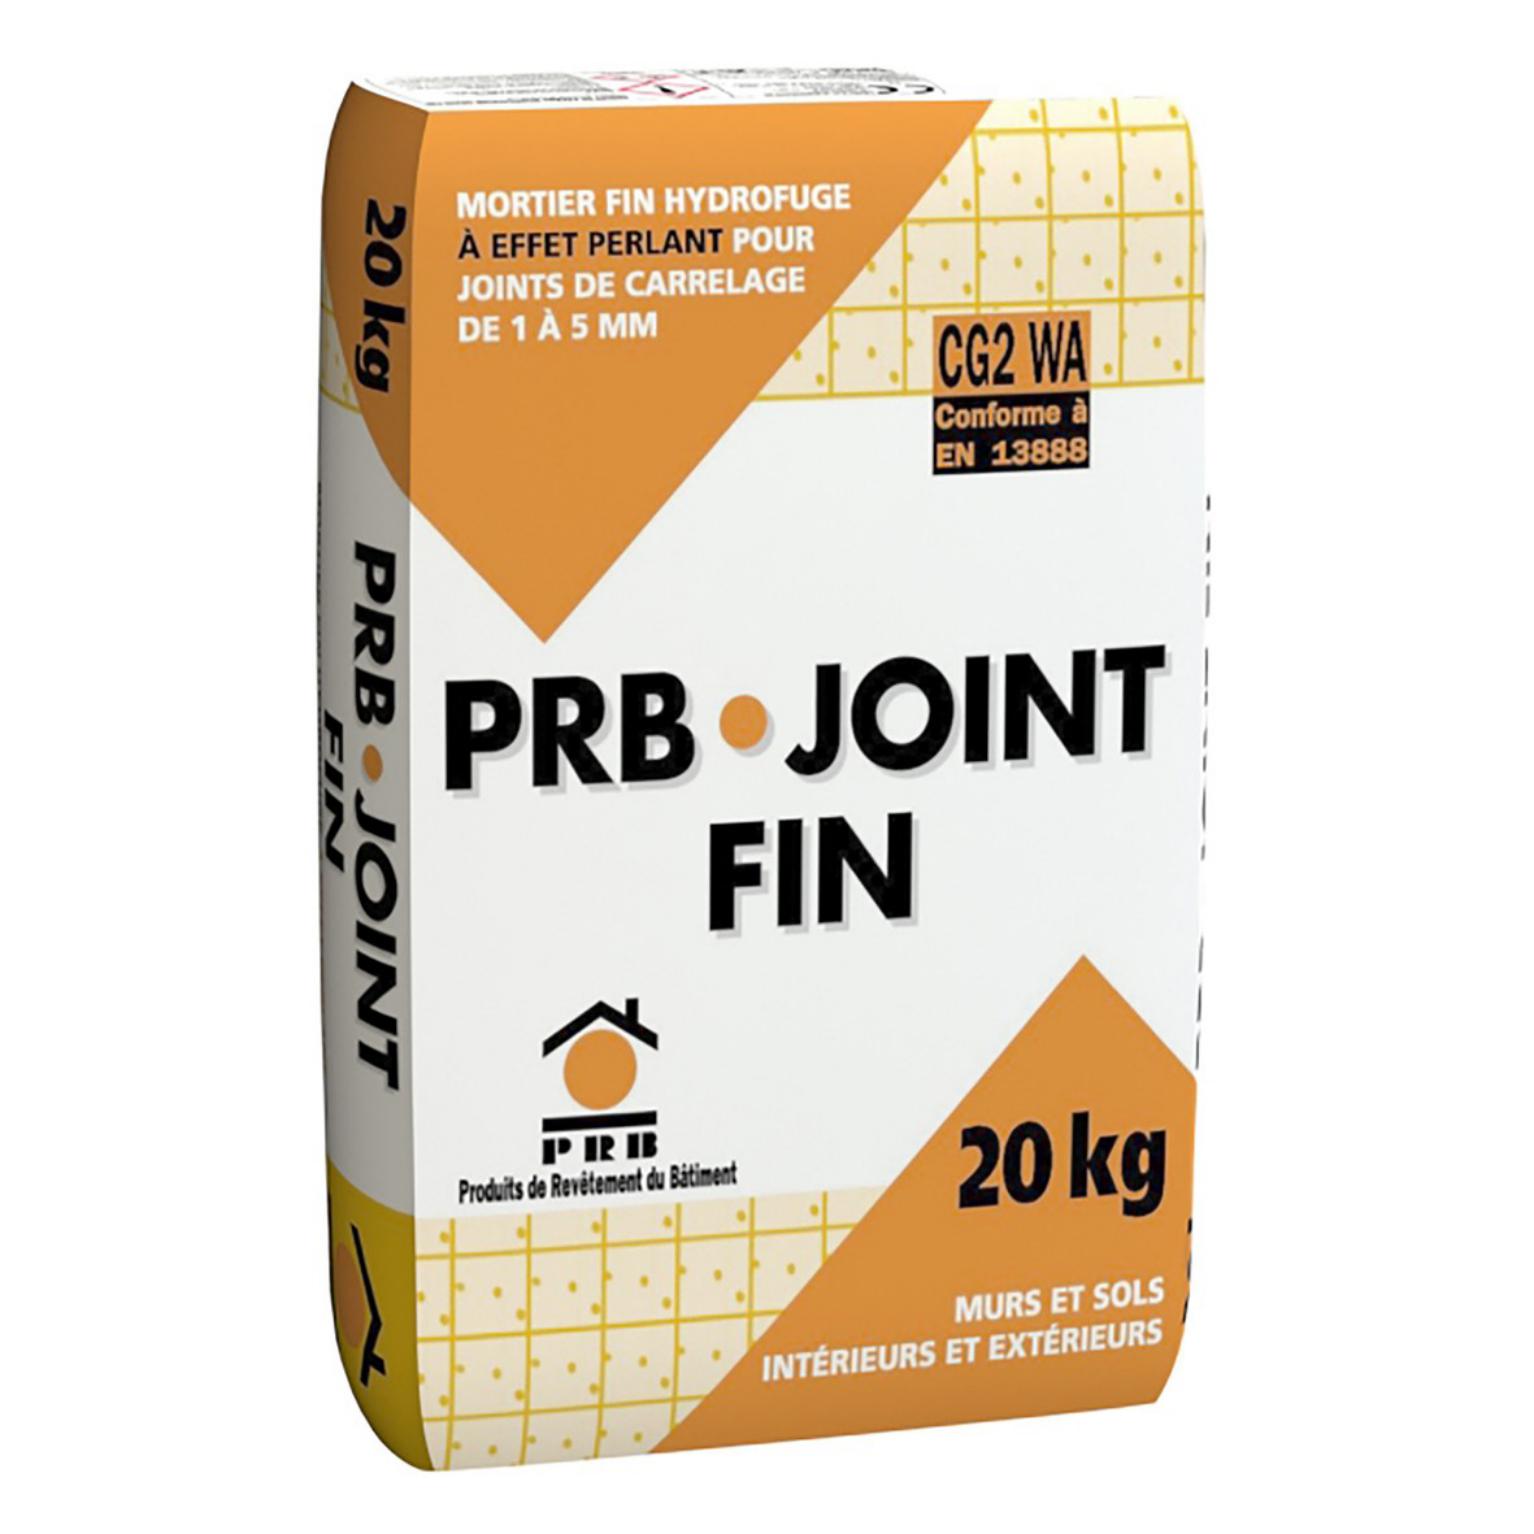 PRB JOINT FIN BLANC